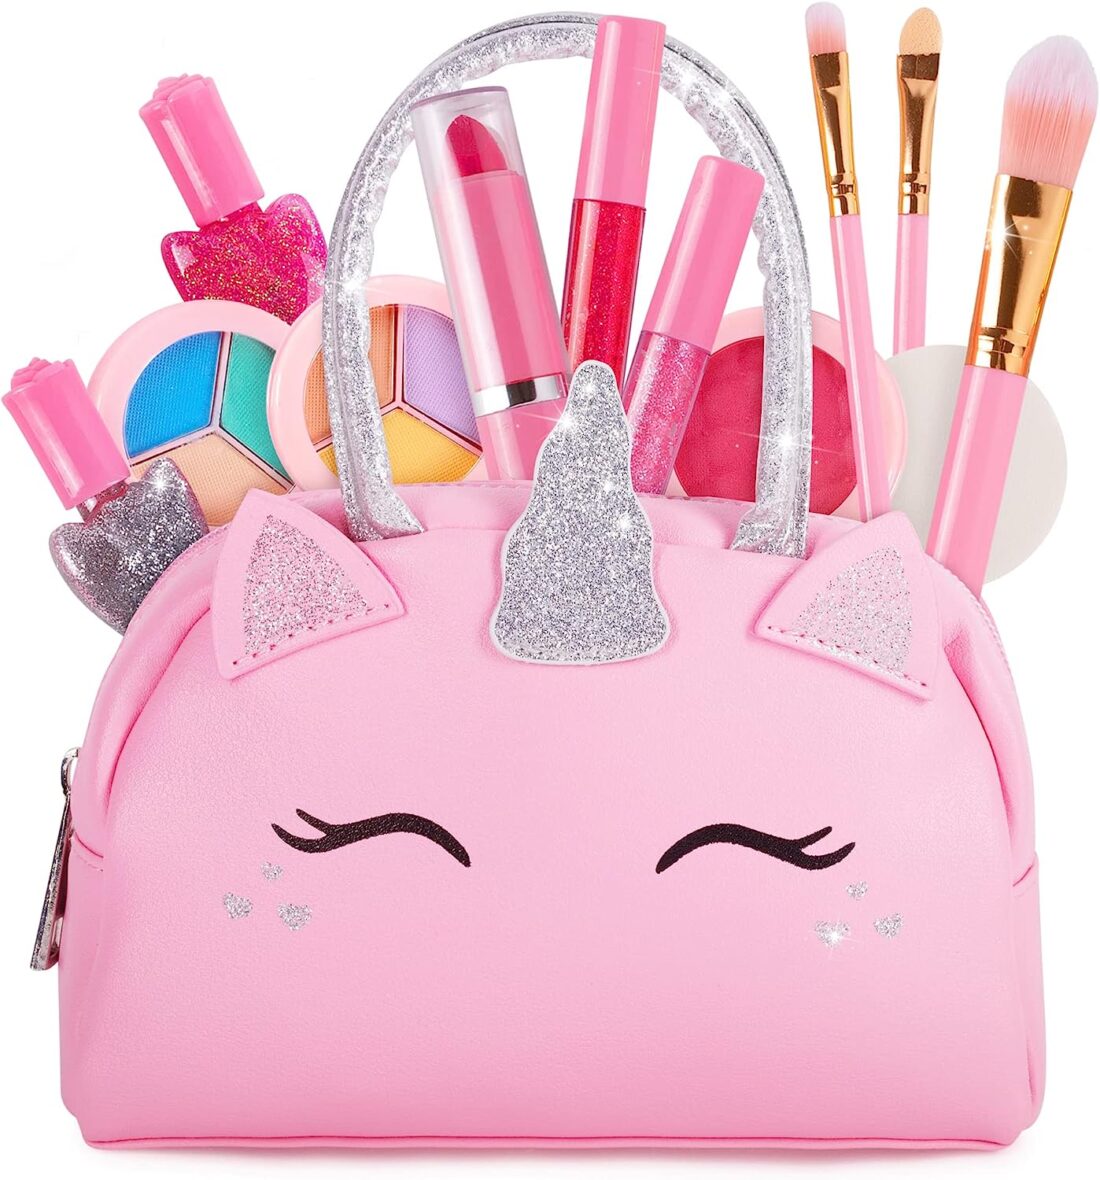 Kids Real Makeup Kit for Little Girls: with Pink Unicorn Purse – Real, Non Toxic, Washable Make Up Toy